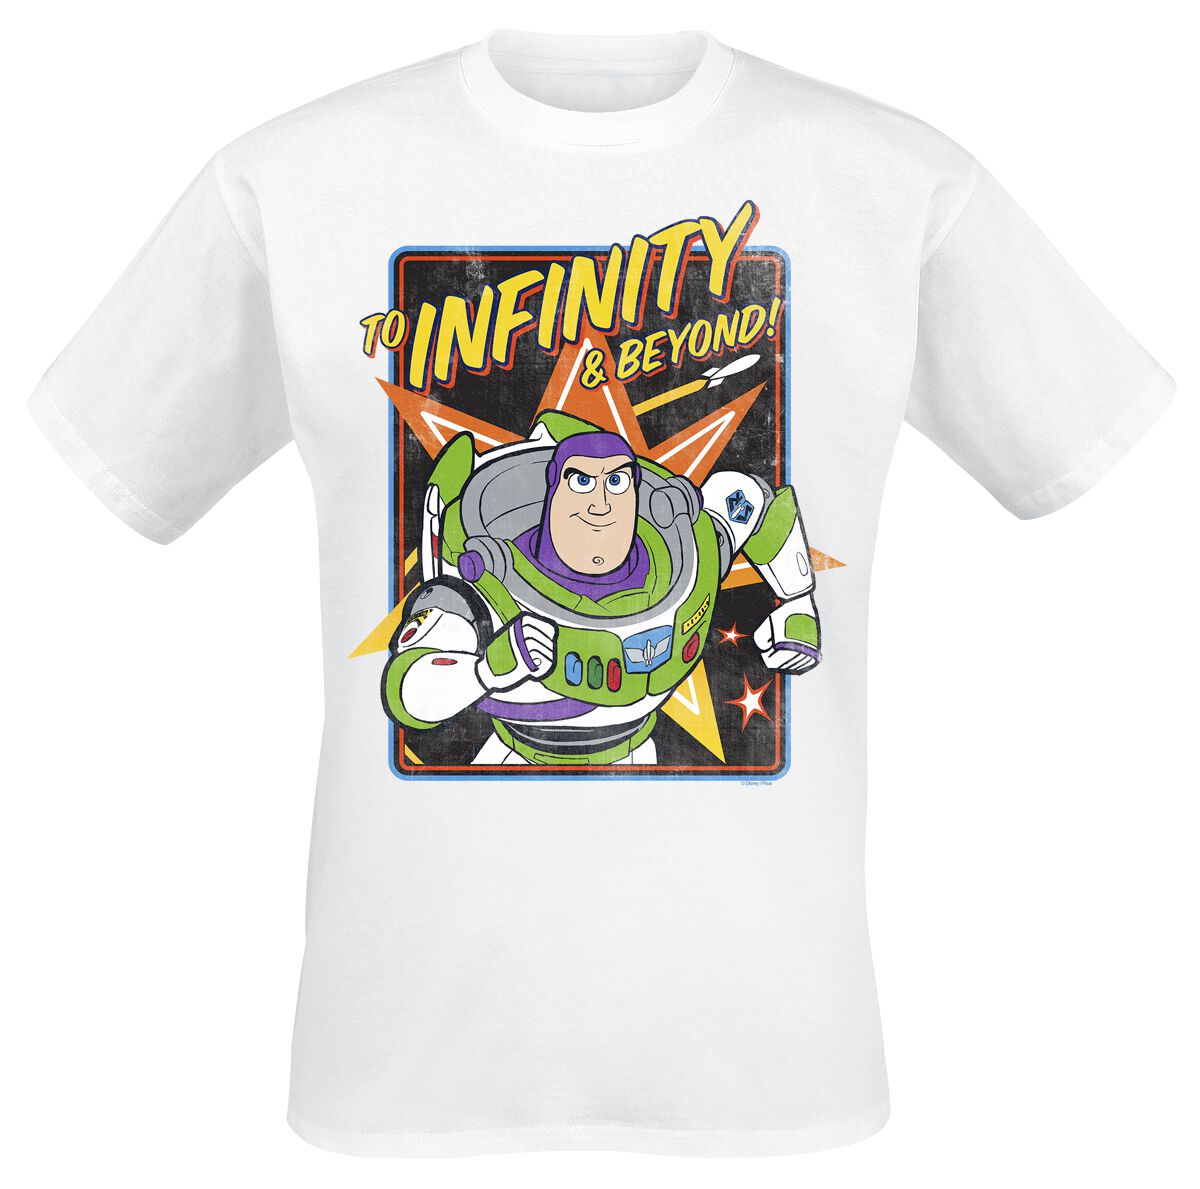 Toy Story 4 Buzz To Infinity T-Shirt white